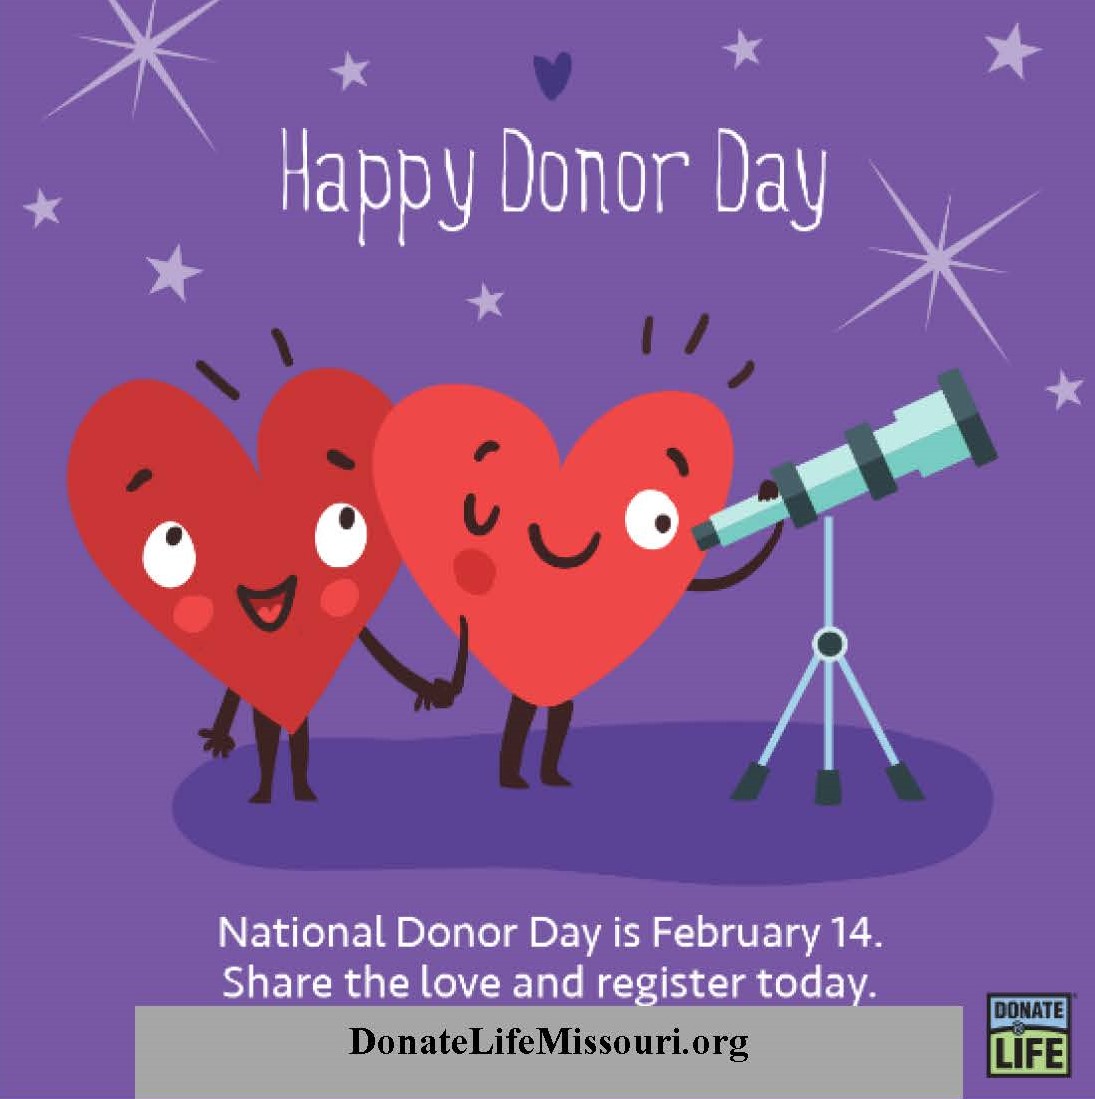 NATIONAL DONOR DAY IS FEBRUARY 14